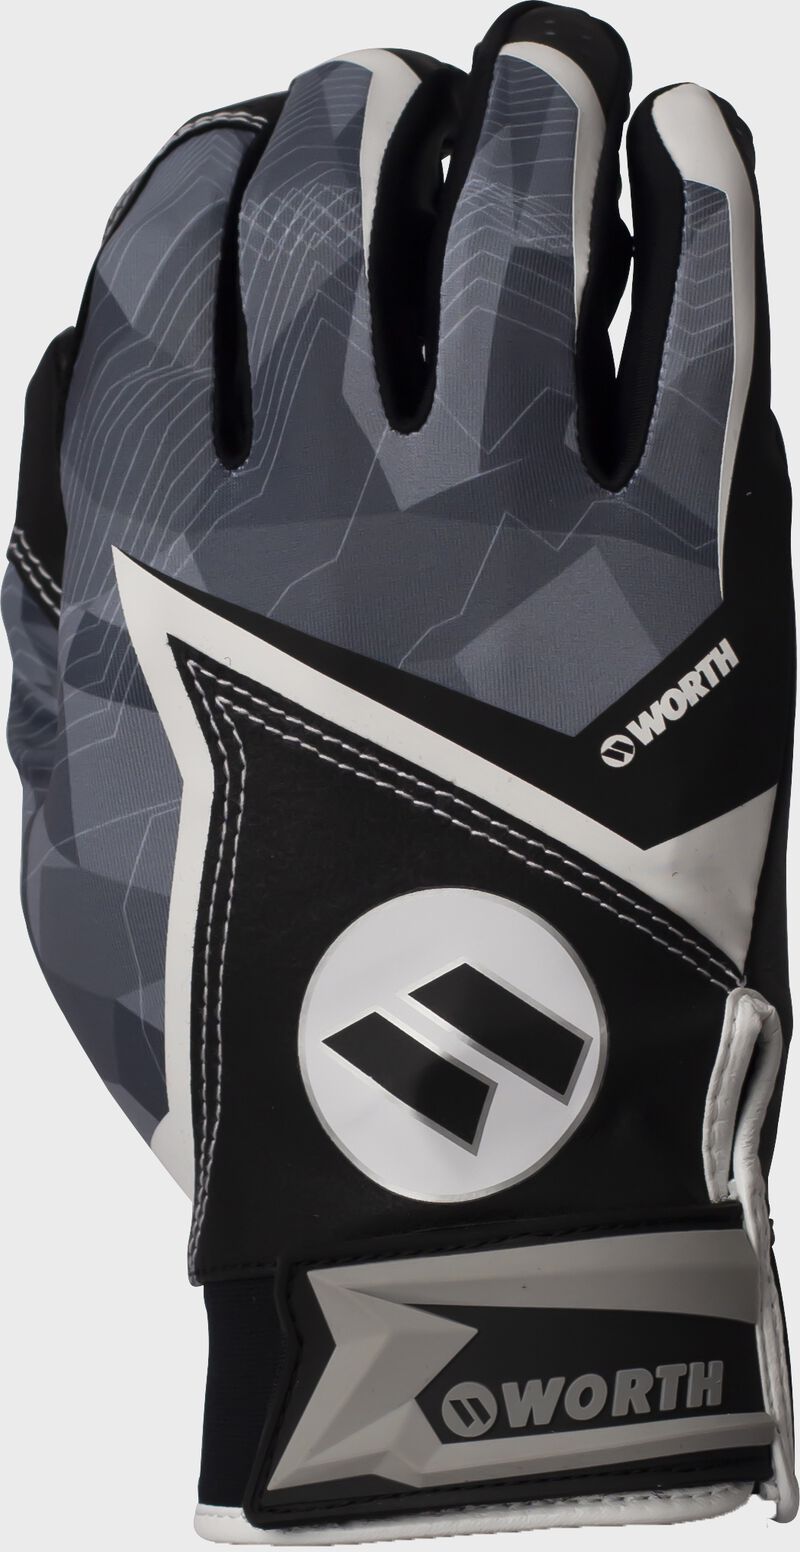 Back of a black 2020 Worth adult batting glove with the logo on the back of the palm - SKU: WBGL20 loading=